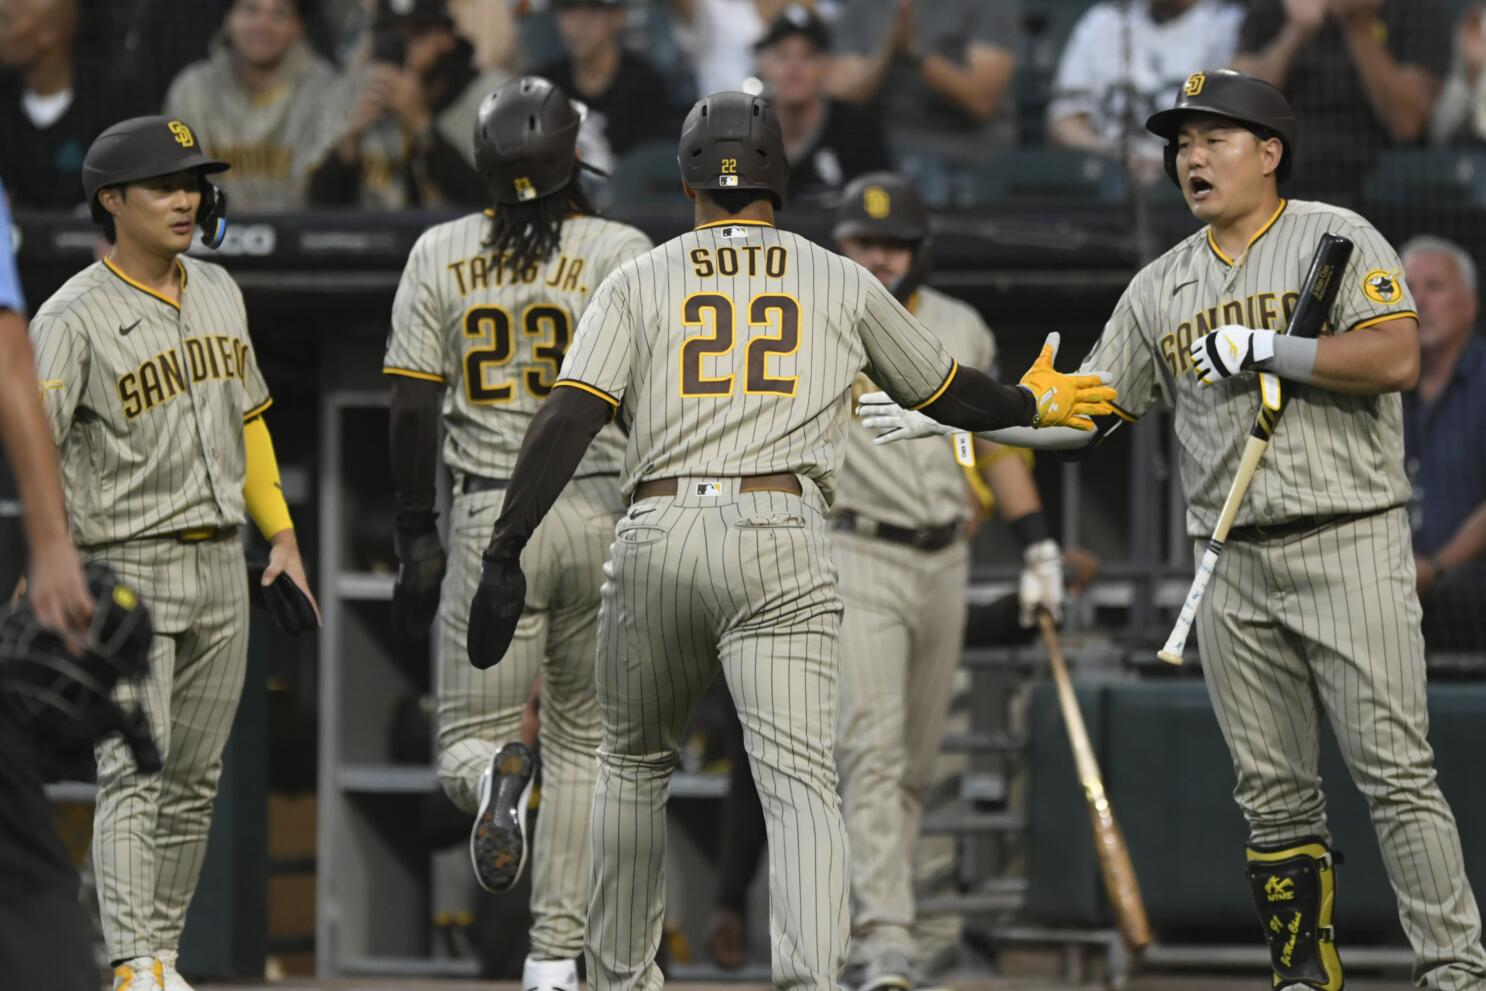 Padres beat White Sox, complete September surge - The San Diego